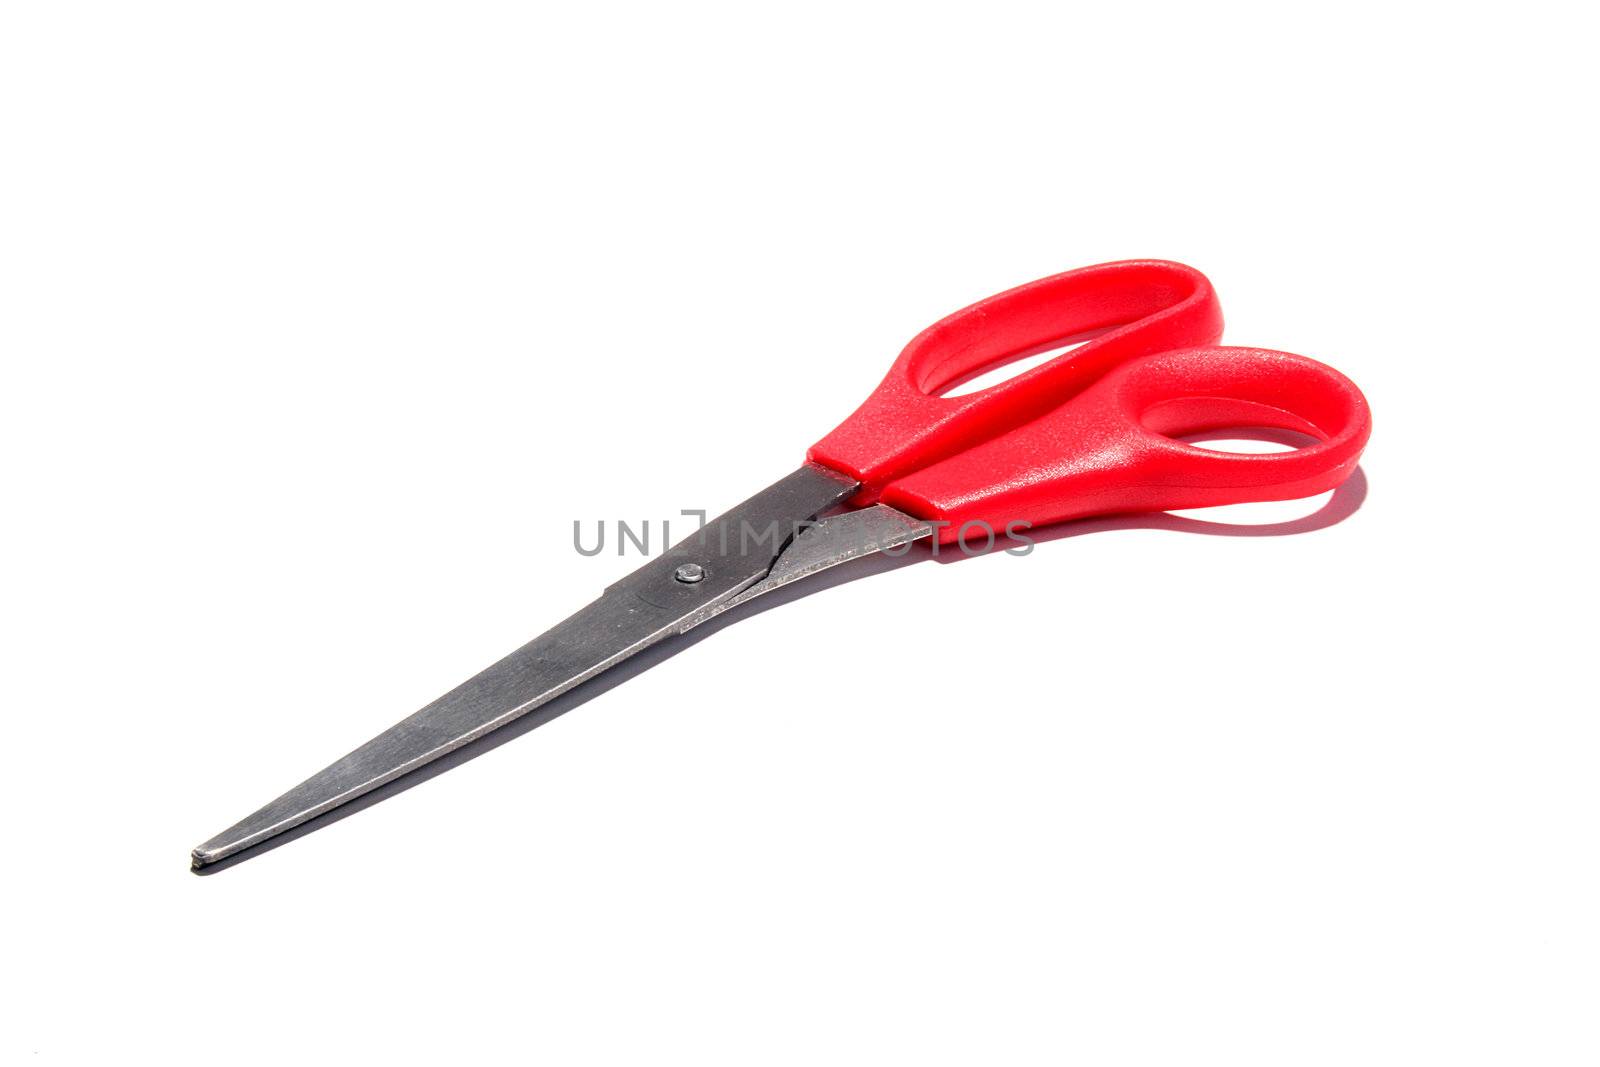 Scissors with red handles by VIPDesignUSA